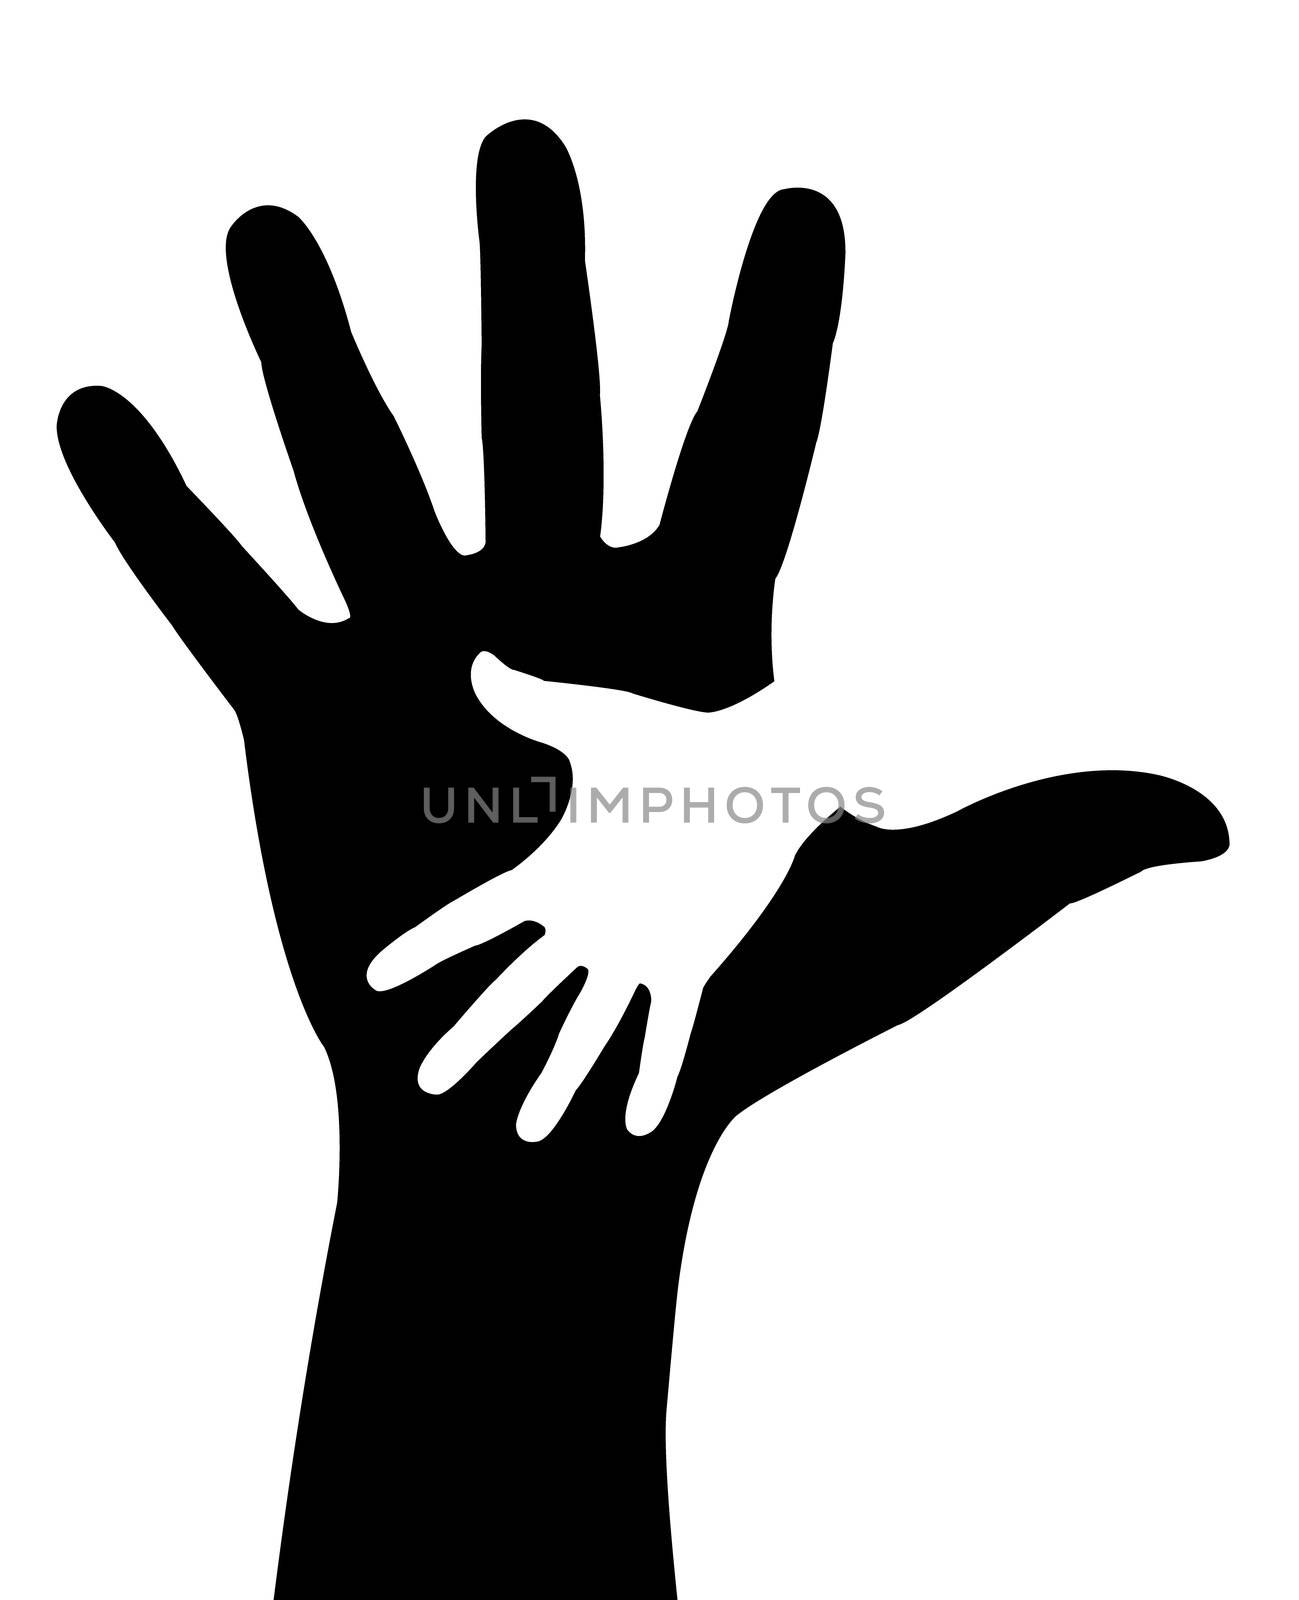 hands silhouette vector by Dr.G